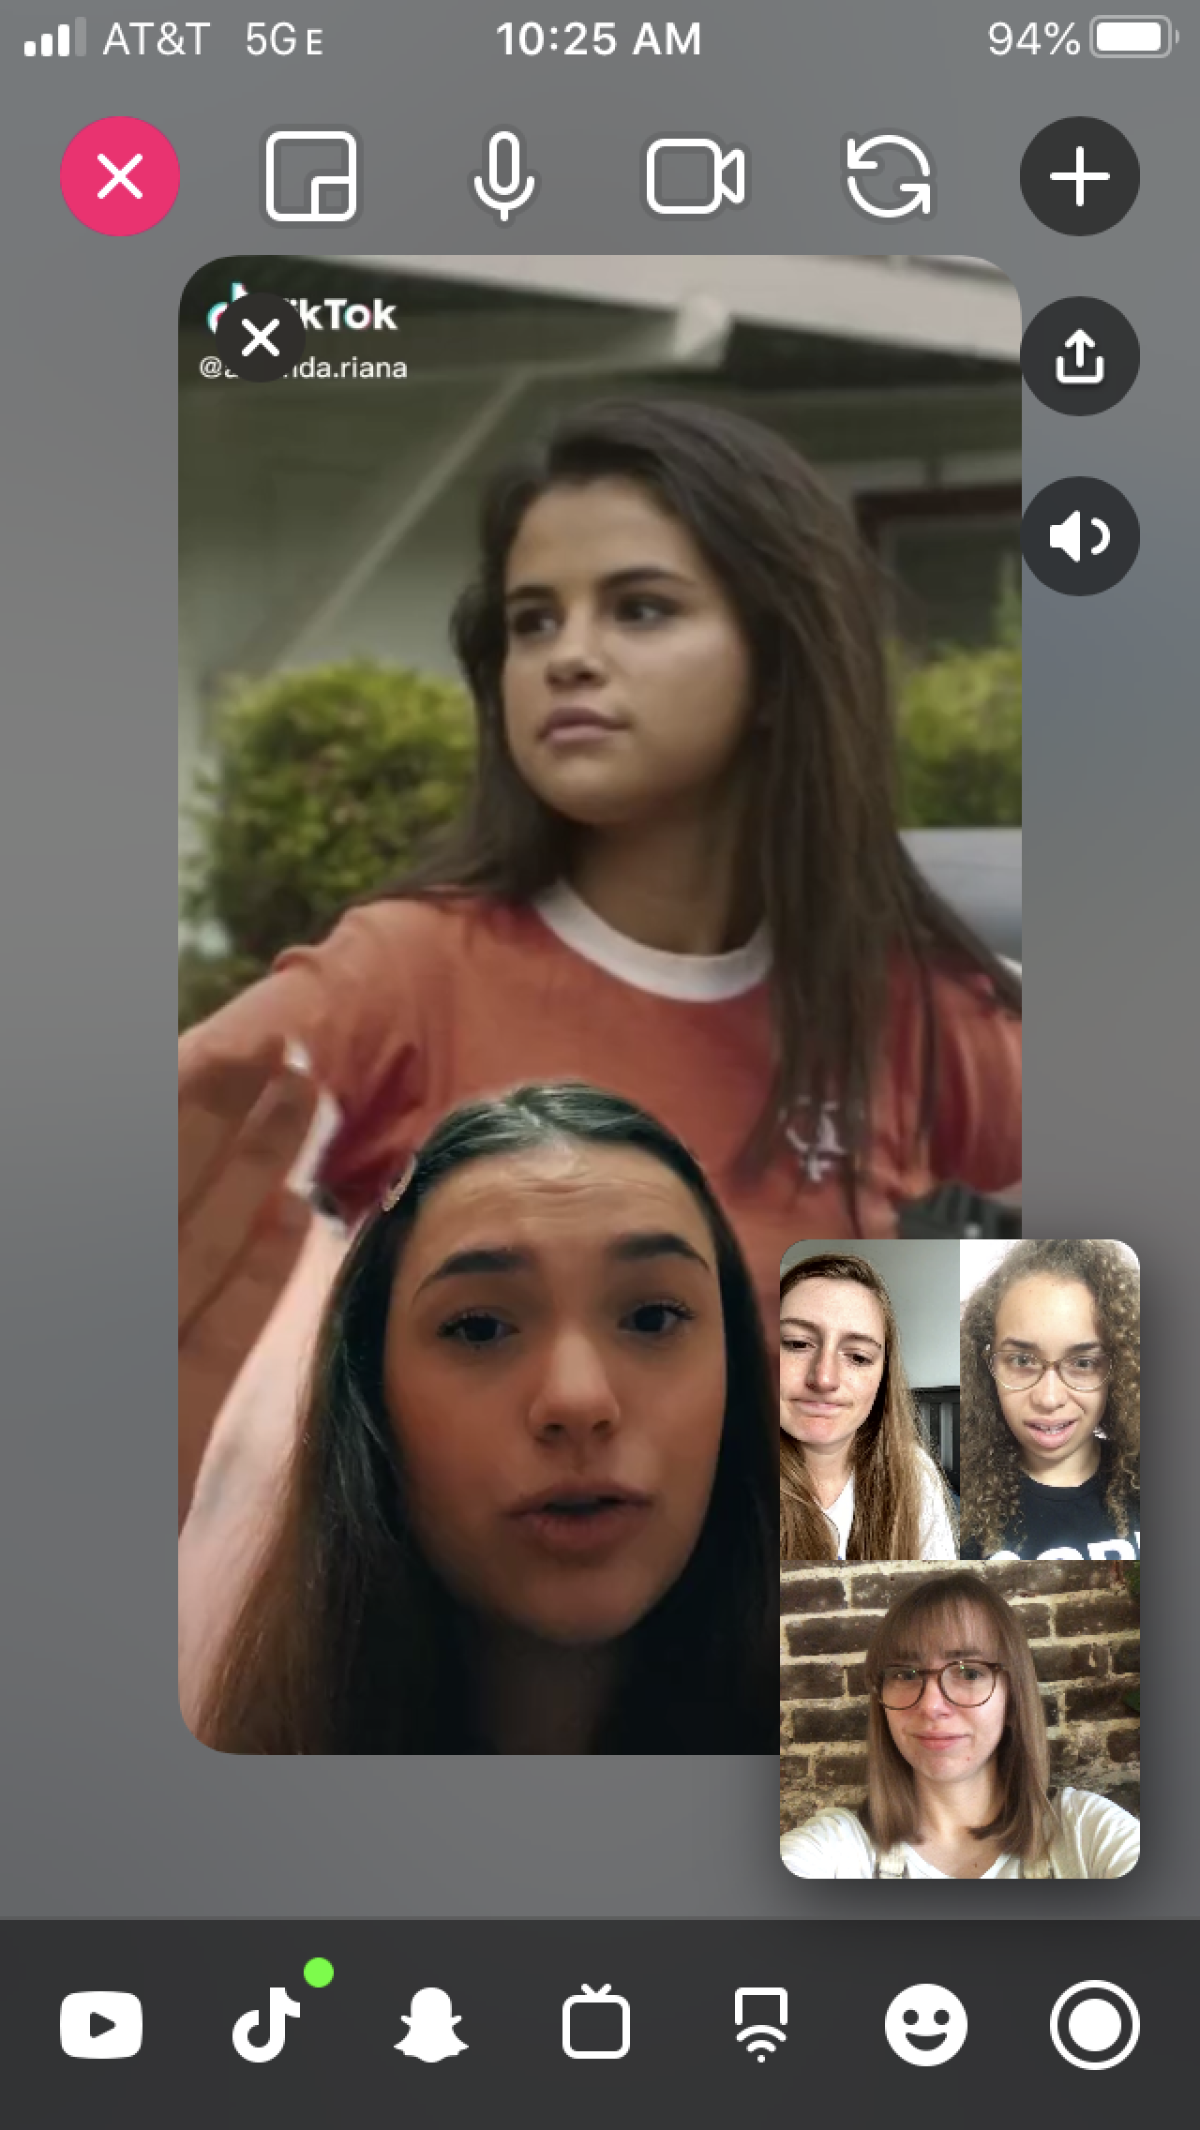 Unwelcomed faces on our screen during the video chat, courtesy of TikTok.